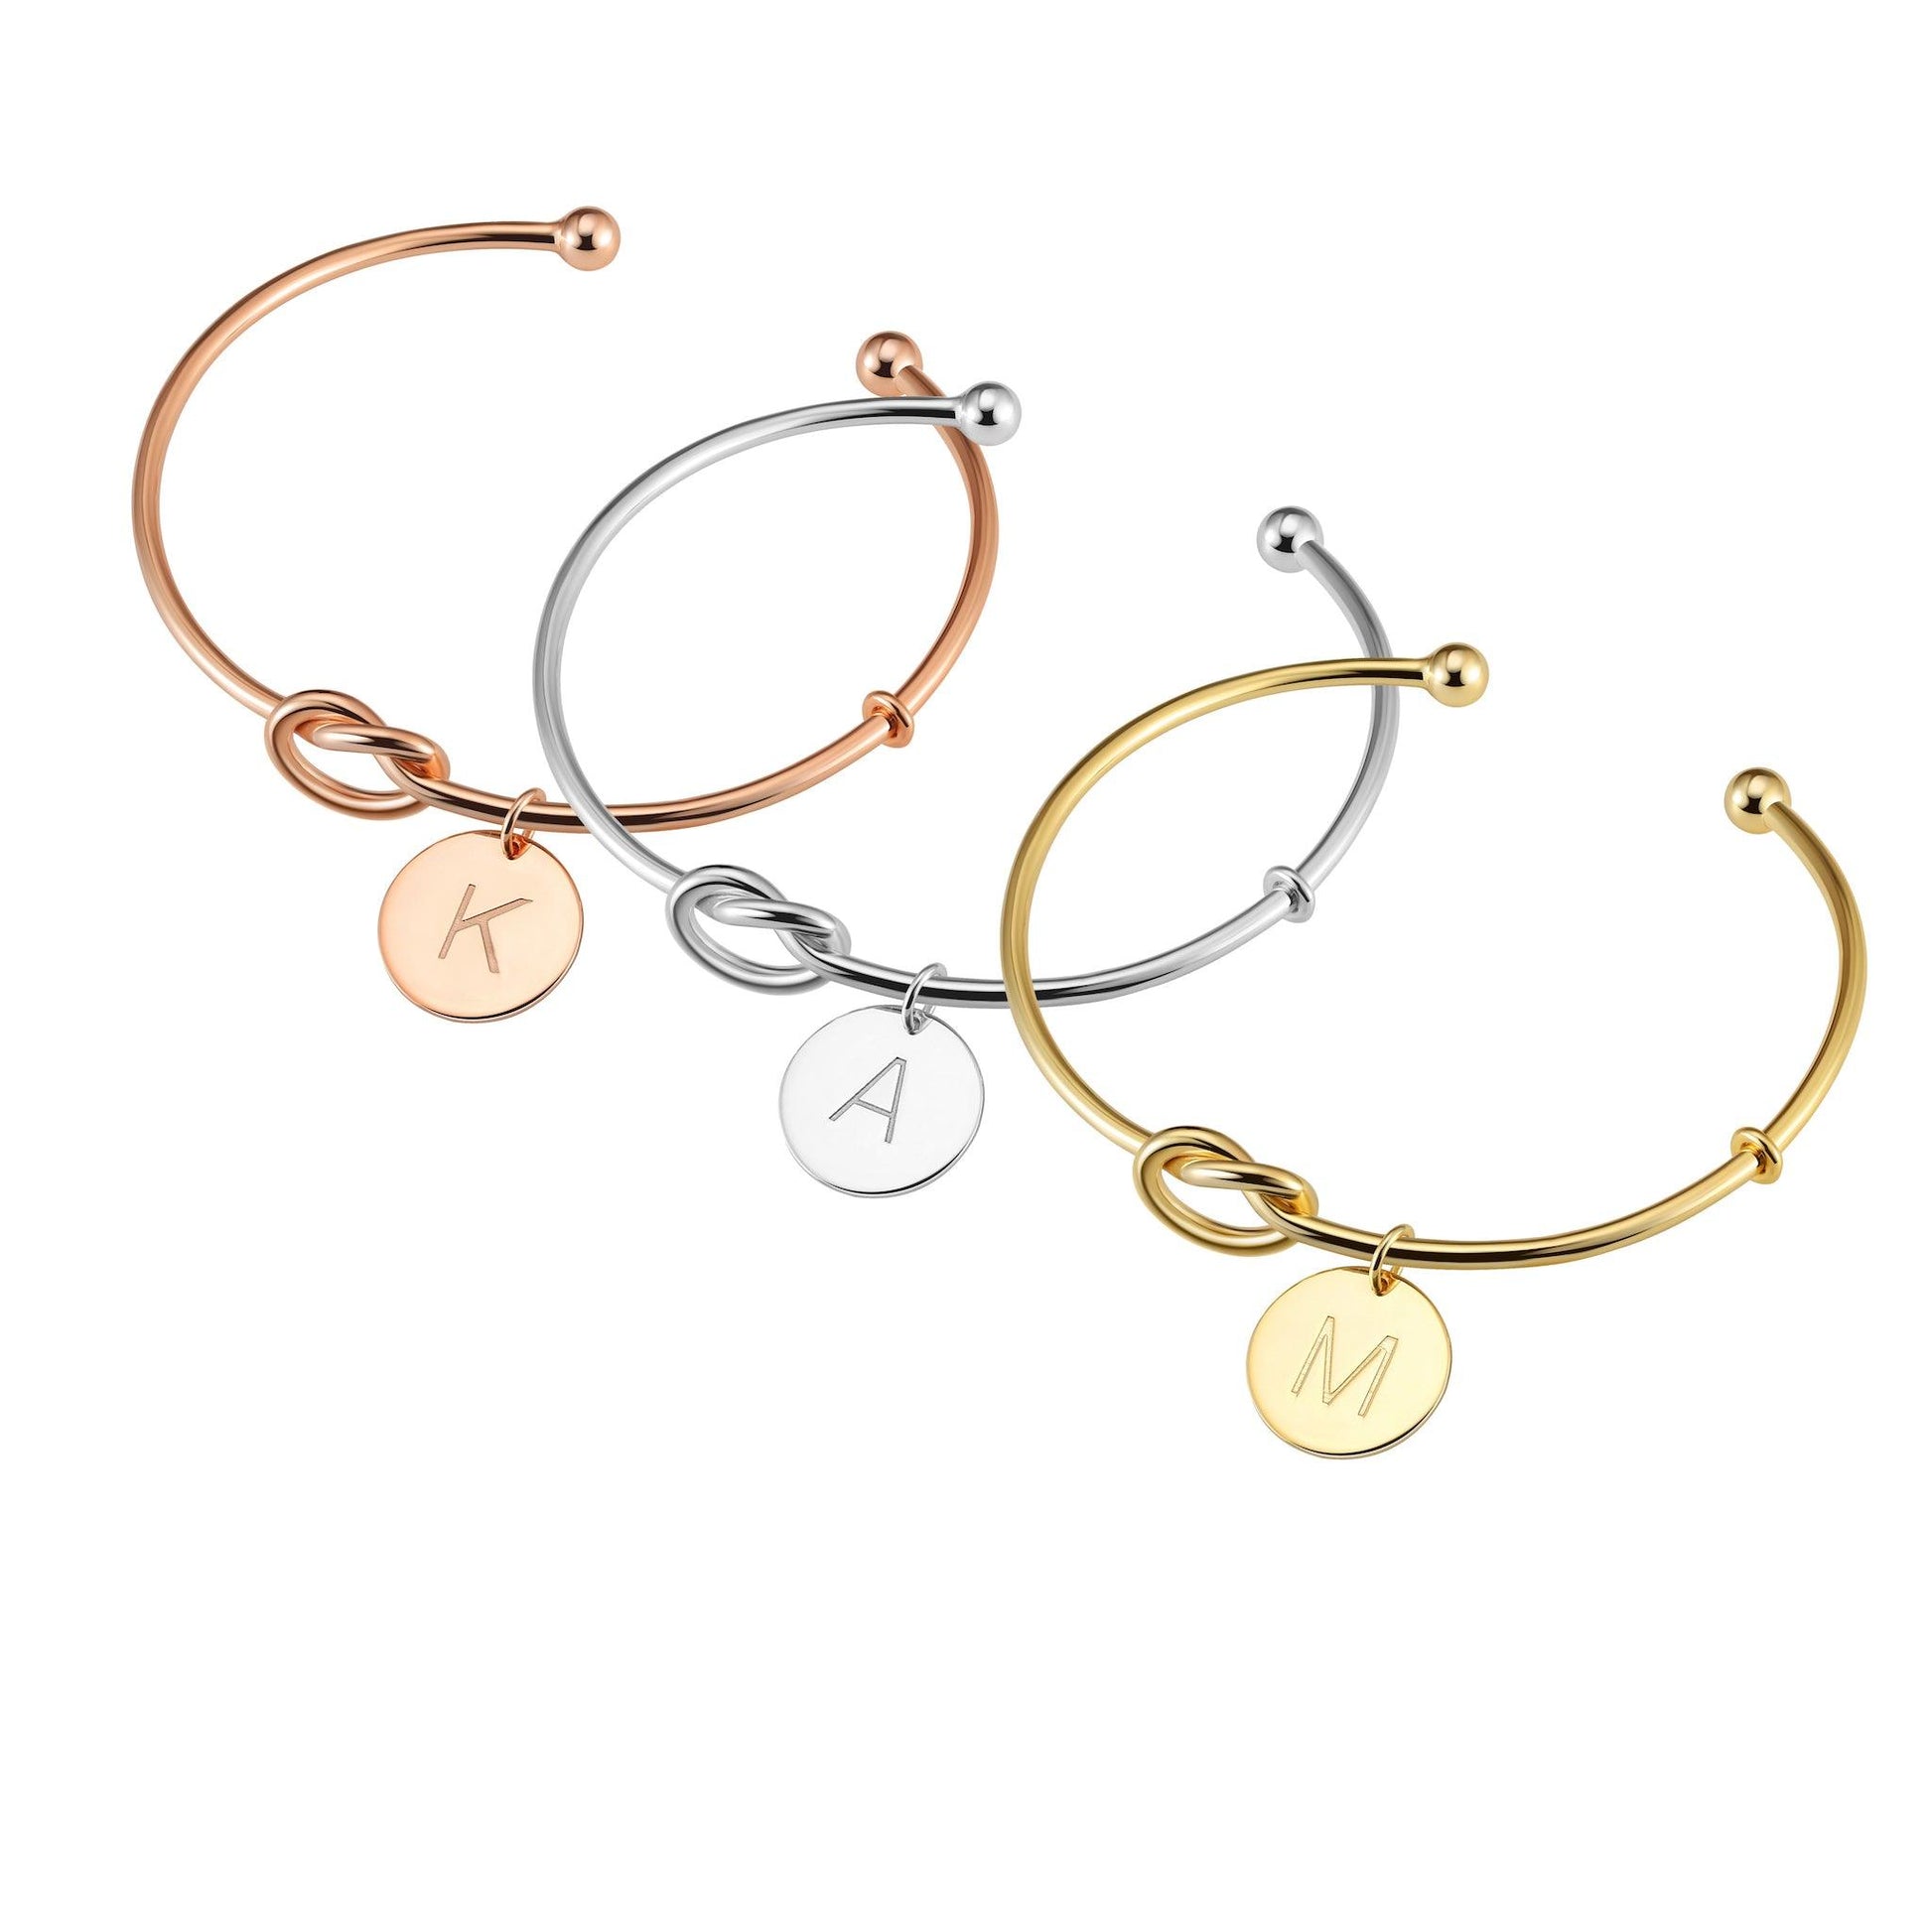 The Knot Initial Bracelet crafted in sterling silver is available in rose gold, gold and silver finishes and include an initial letter charm.